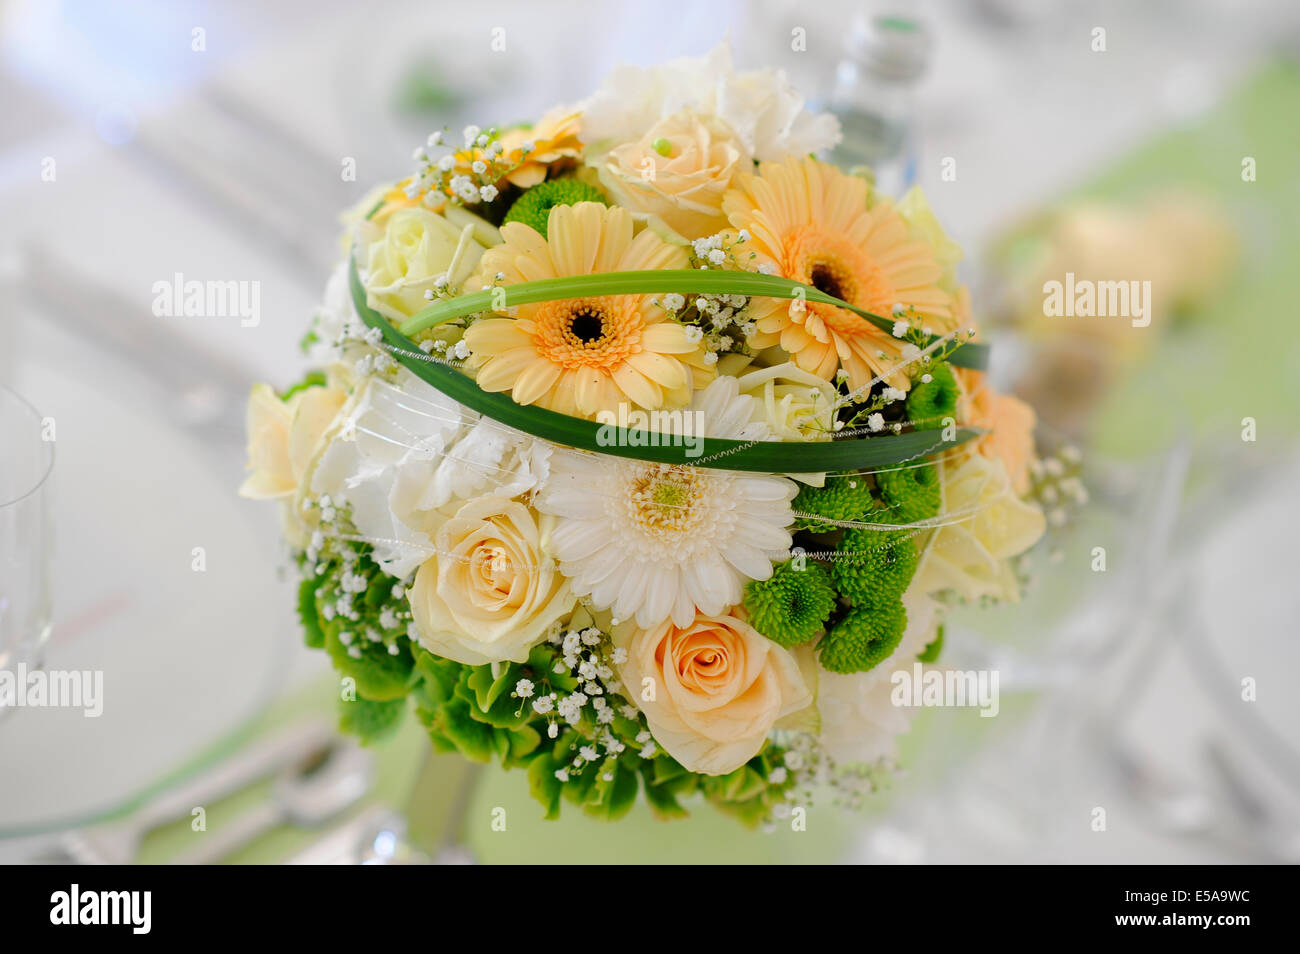 Table decoration of a wedding table with wedding bouquet Stock Photo